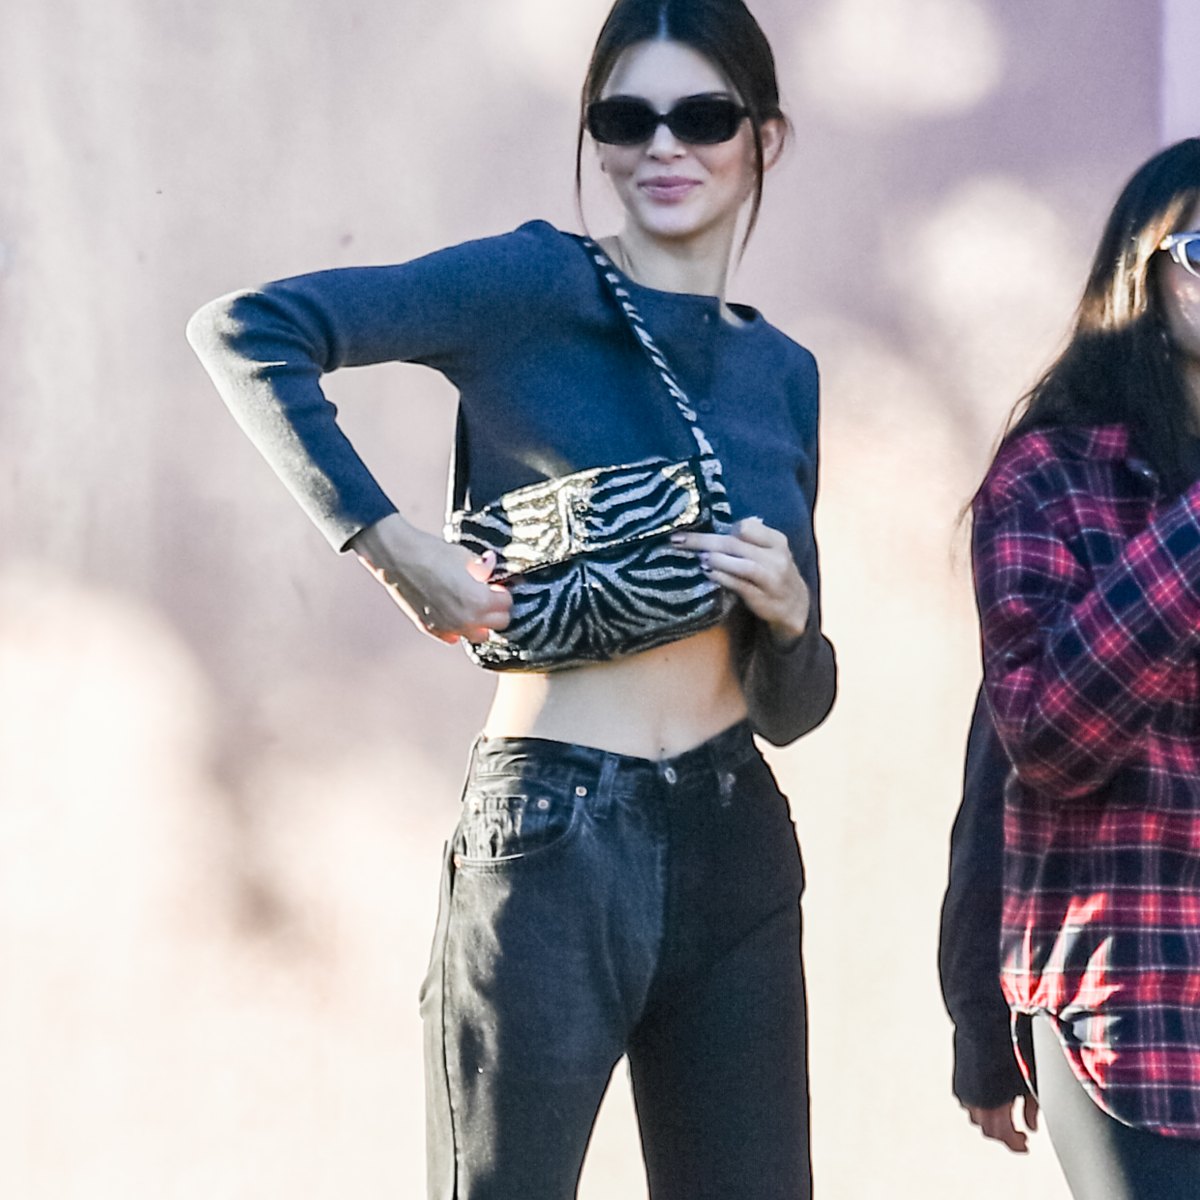 Kendall Jenner Flaunts Abs in High-Waisted Jeans & Crop Top: Photo 4049773, Kendall Jenner Photos